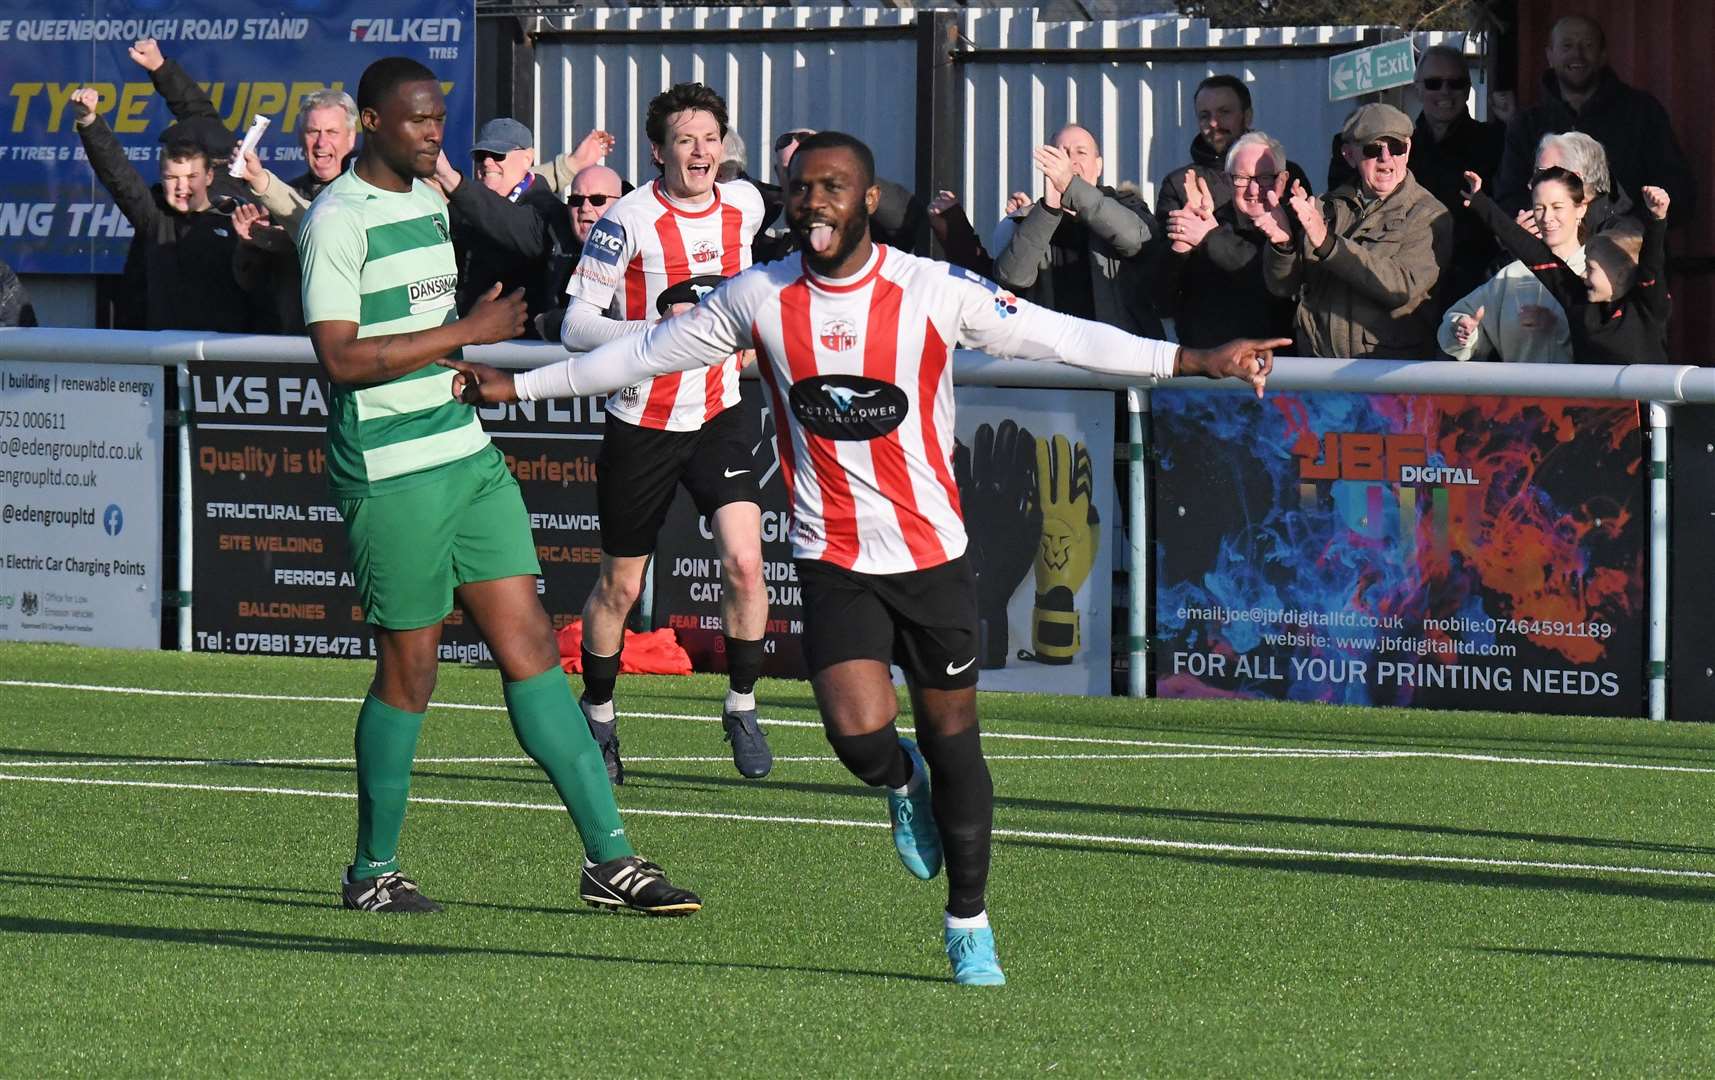 Warren Mfula in happier times at Sheppey - celebrating a goal on their way to winning the Southern Counties East Premier Division title in 2021/22. Picture: Marc Richards